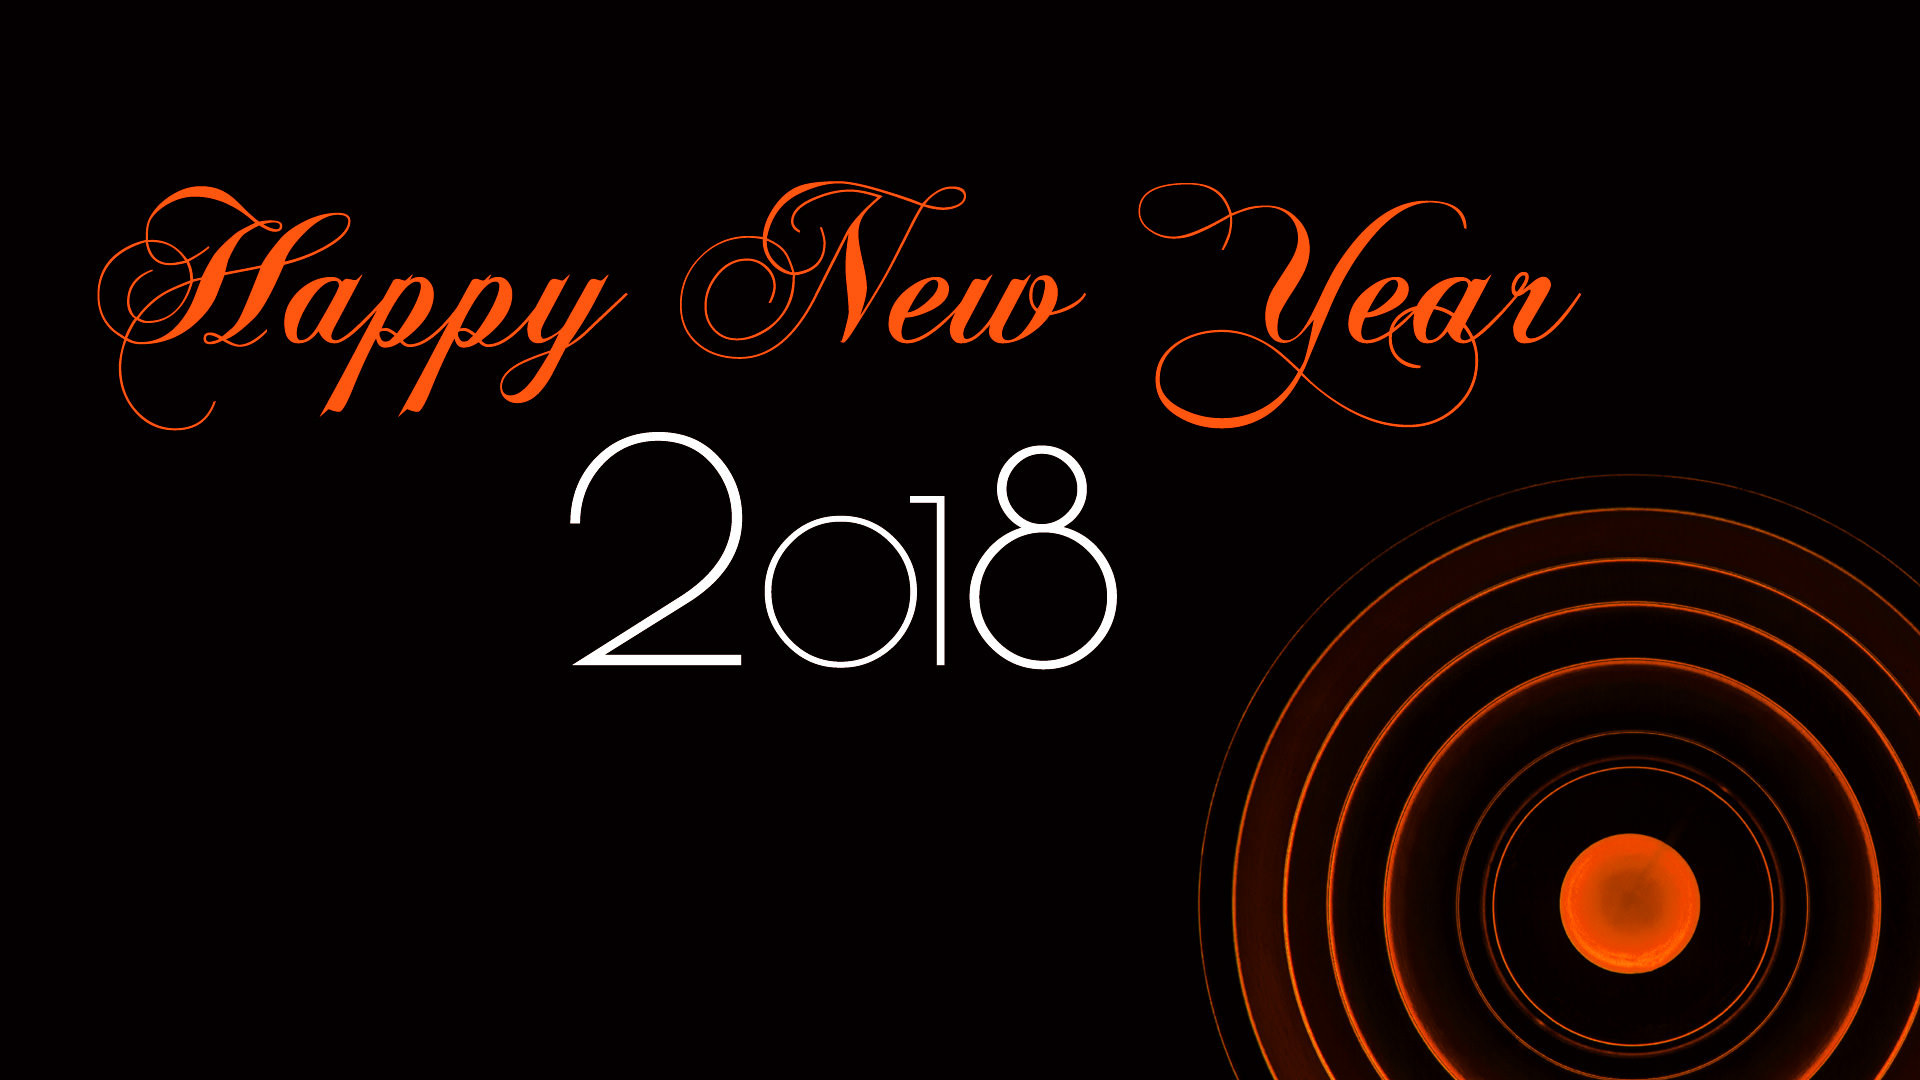 Special Happy New Year 2018 Wallpaper Hd Greetings HD Wallpapers Download Free Images Wallpaper [wallpaper981.blogspot.com]